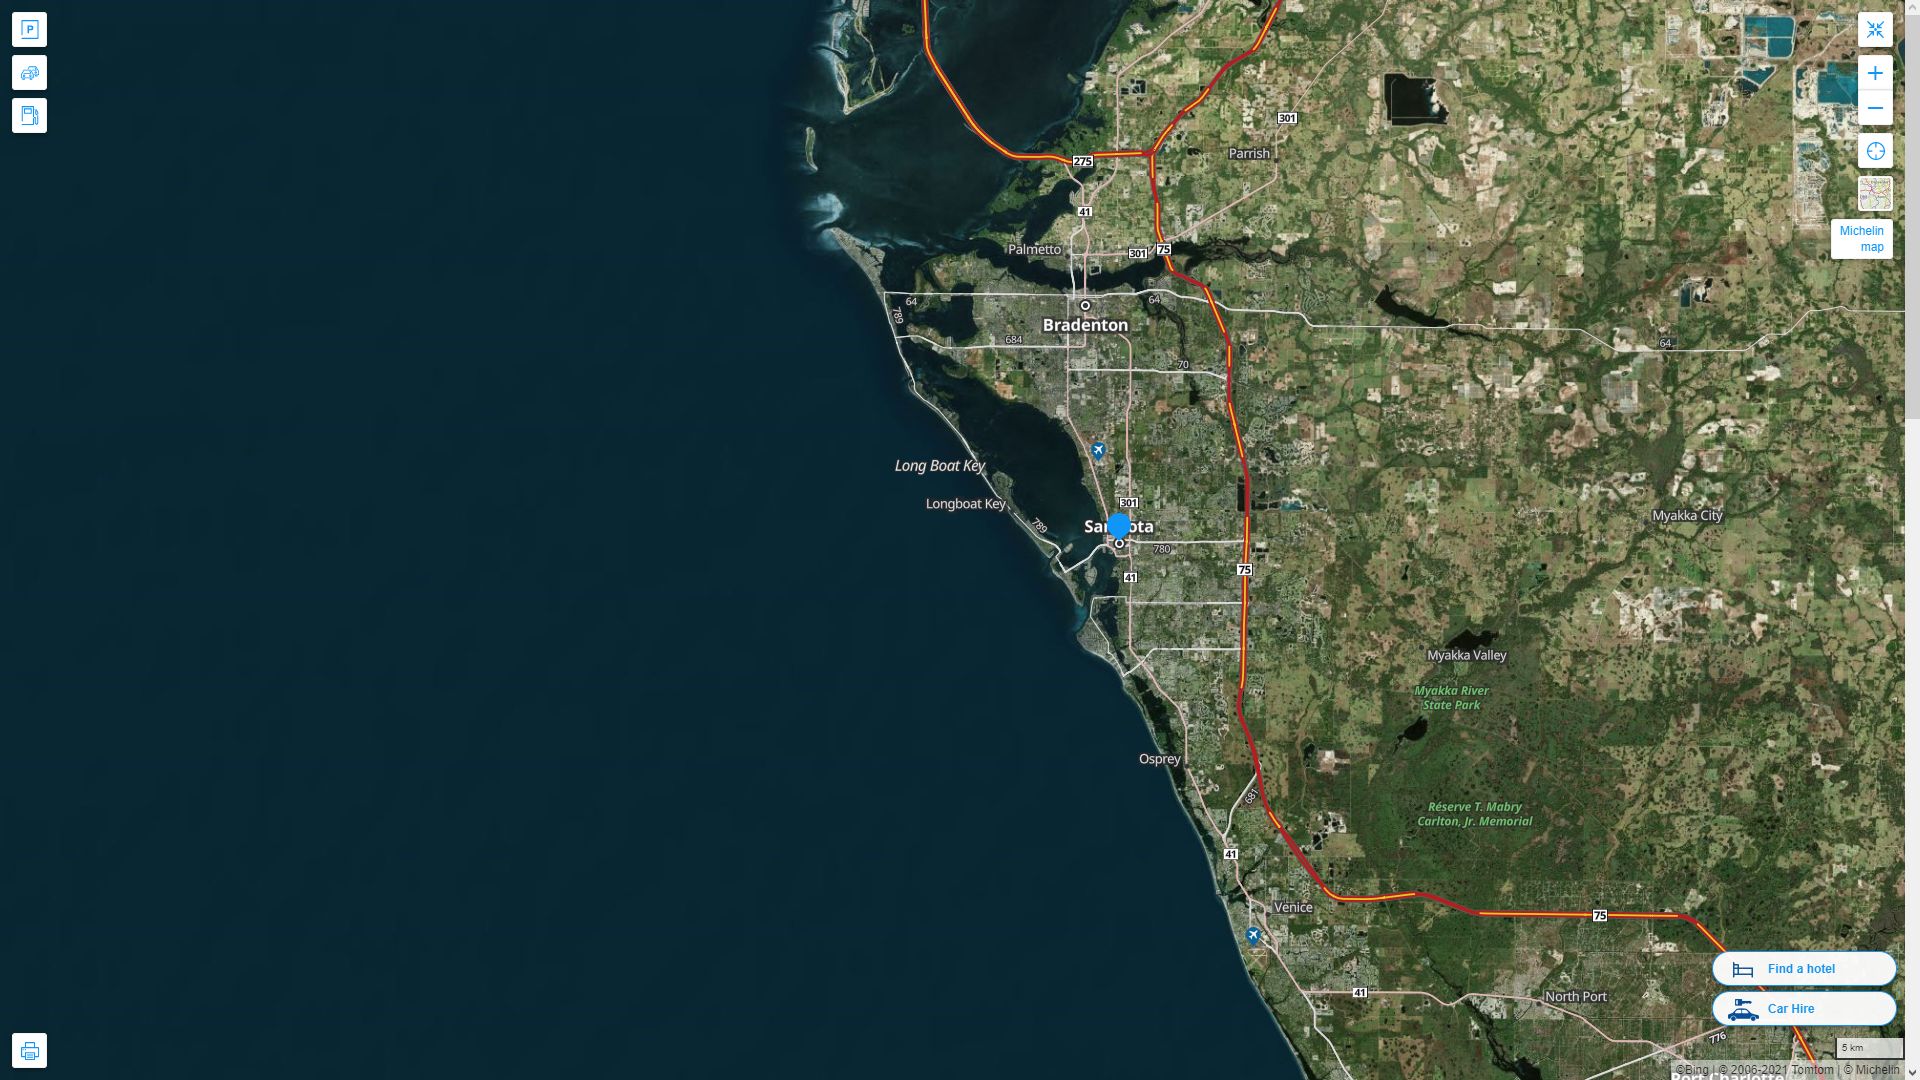 Sarasota Florida Highway and Road Map with Satellite View